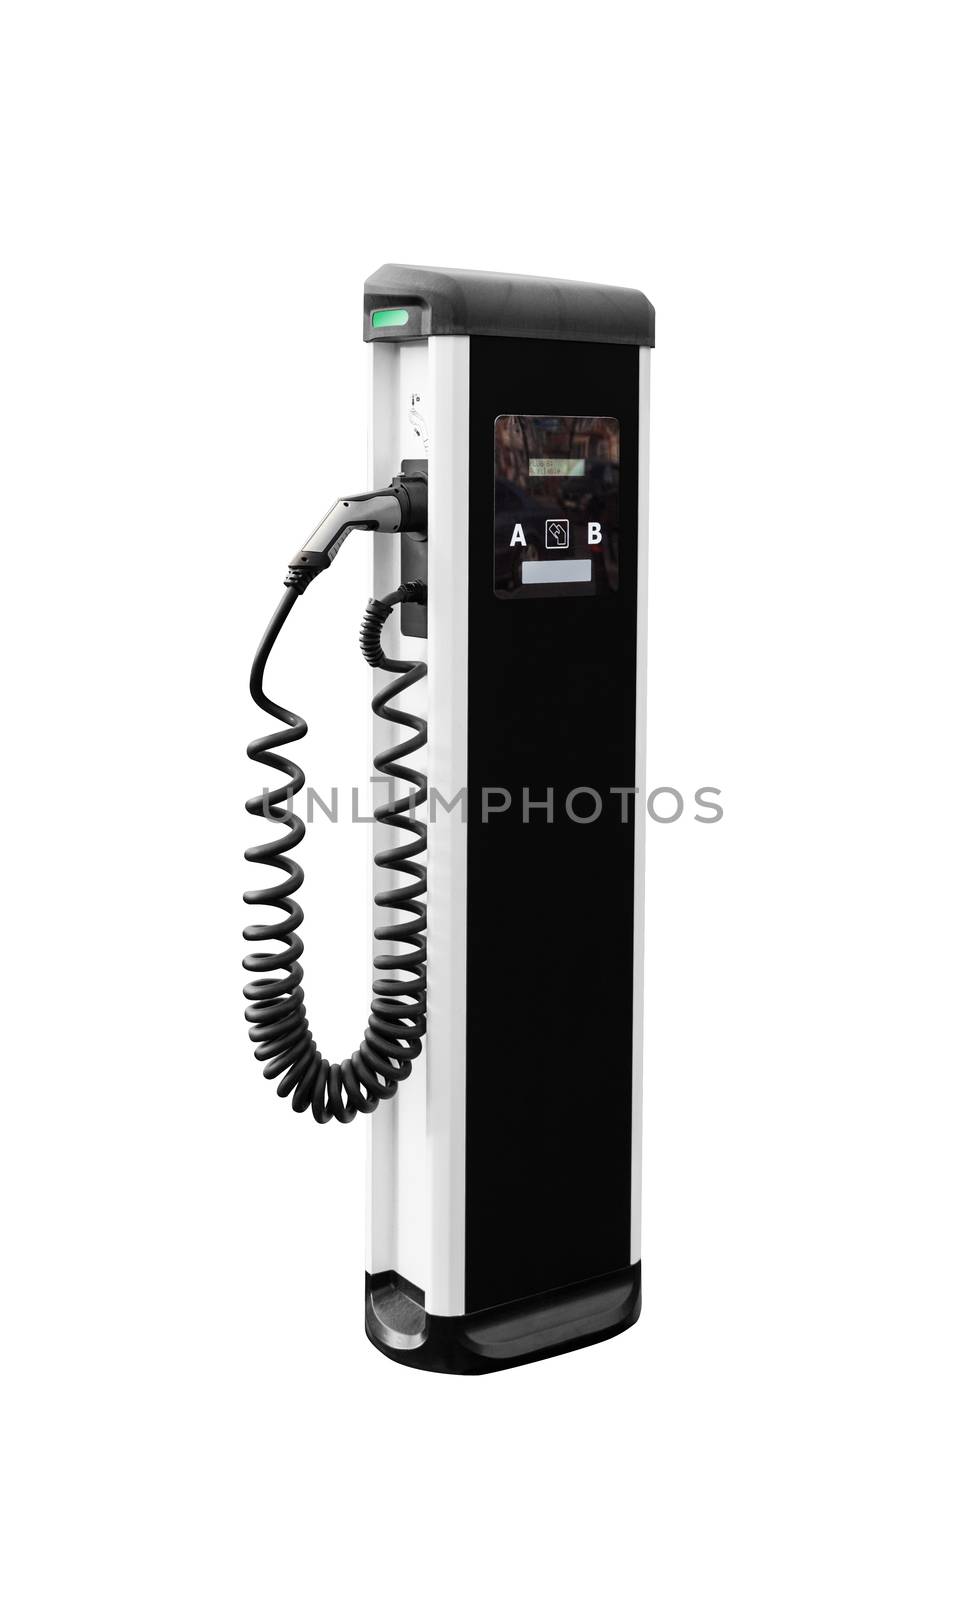 Power supply for electric car charging. Electric car charging station. Close up. With clipping path.